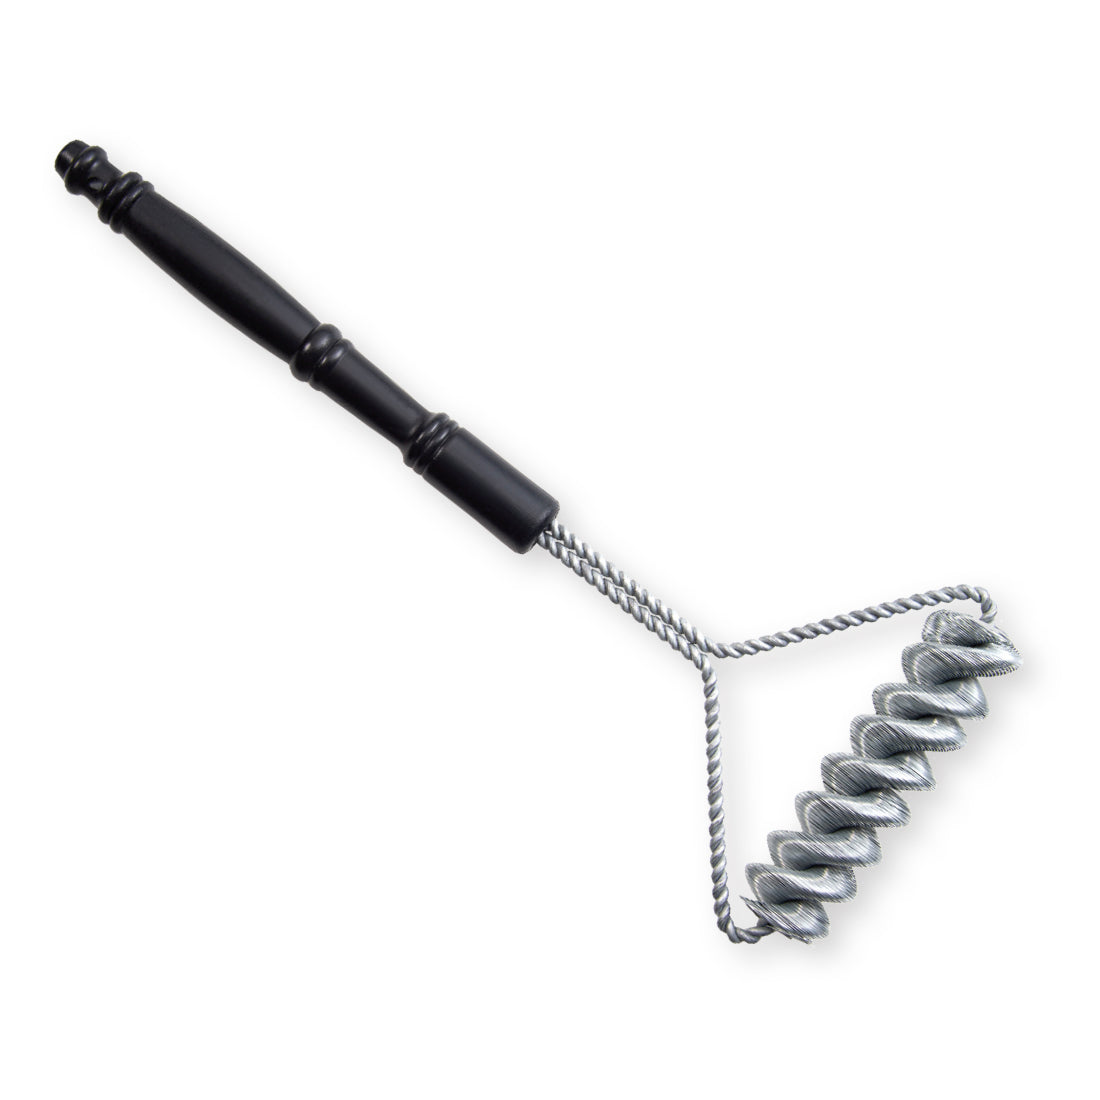 Bbq-Aid becue Grill Brush and Scraper Extended Large Wooden Handle